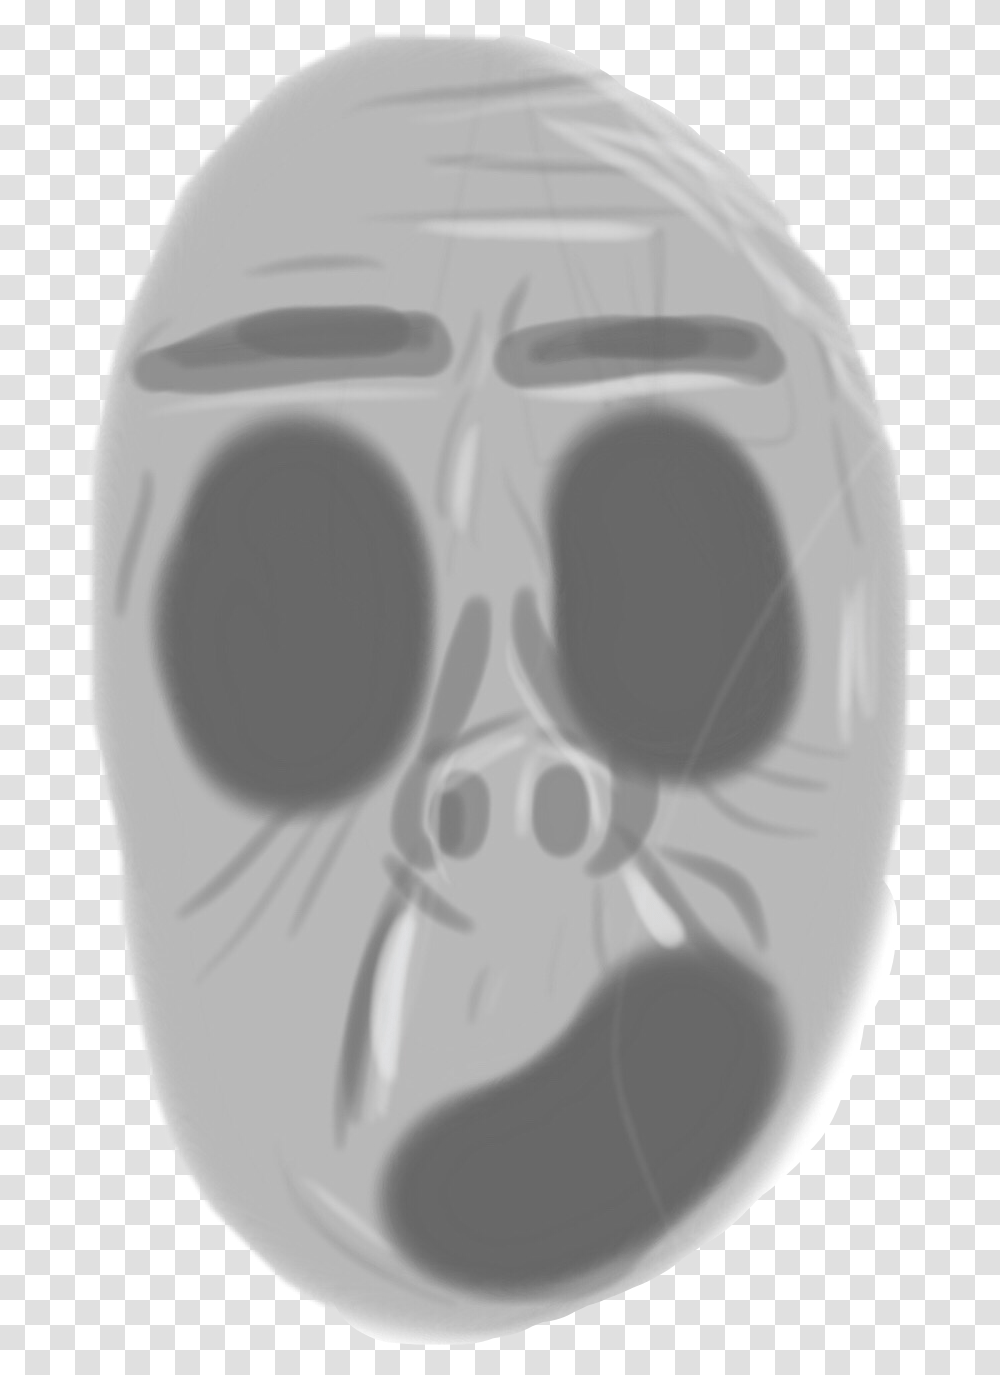 Creepy Face Mask Sticker By Harleen The Bean Skull, Helmet, Clothing, Apparel, X-Ray Transparent Png